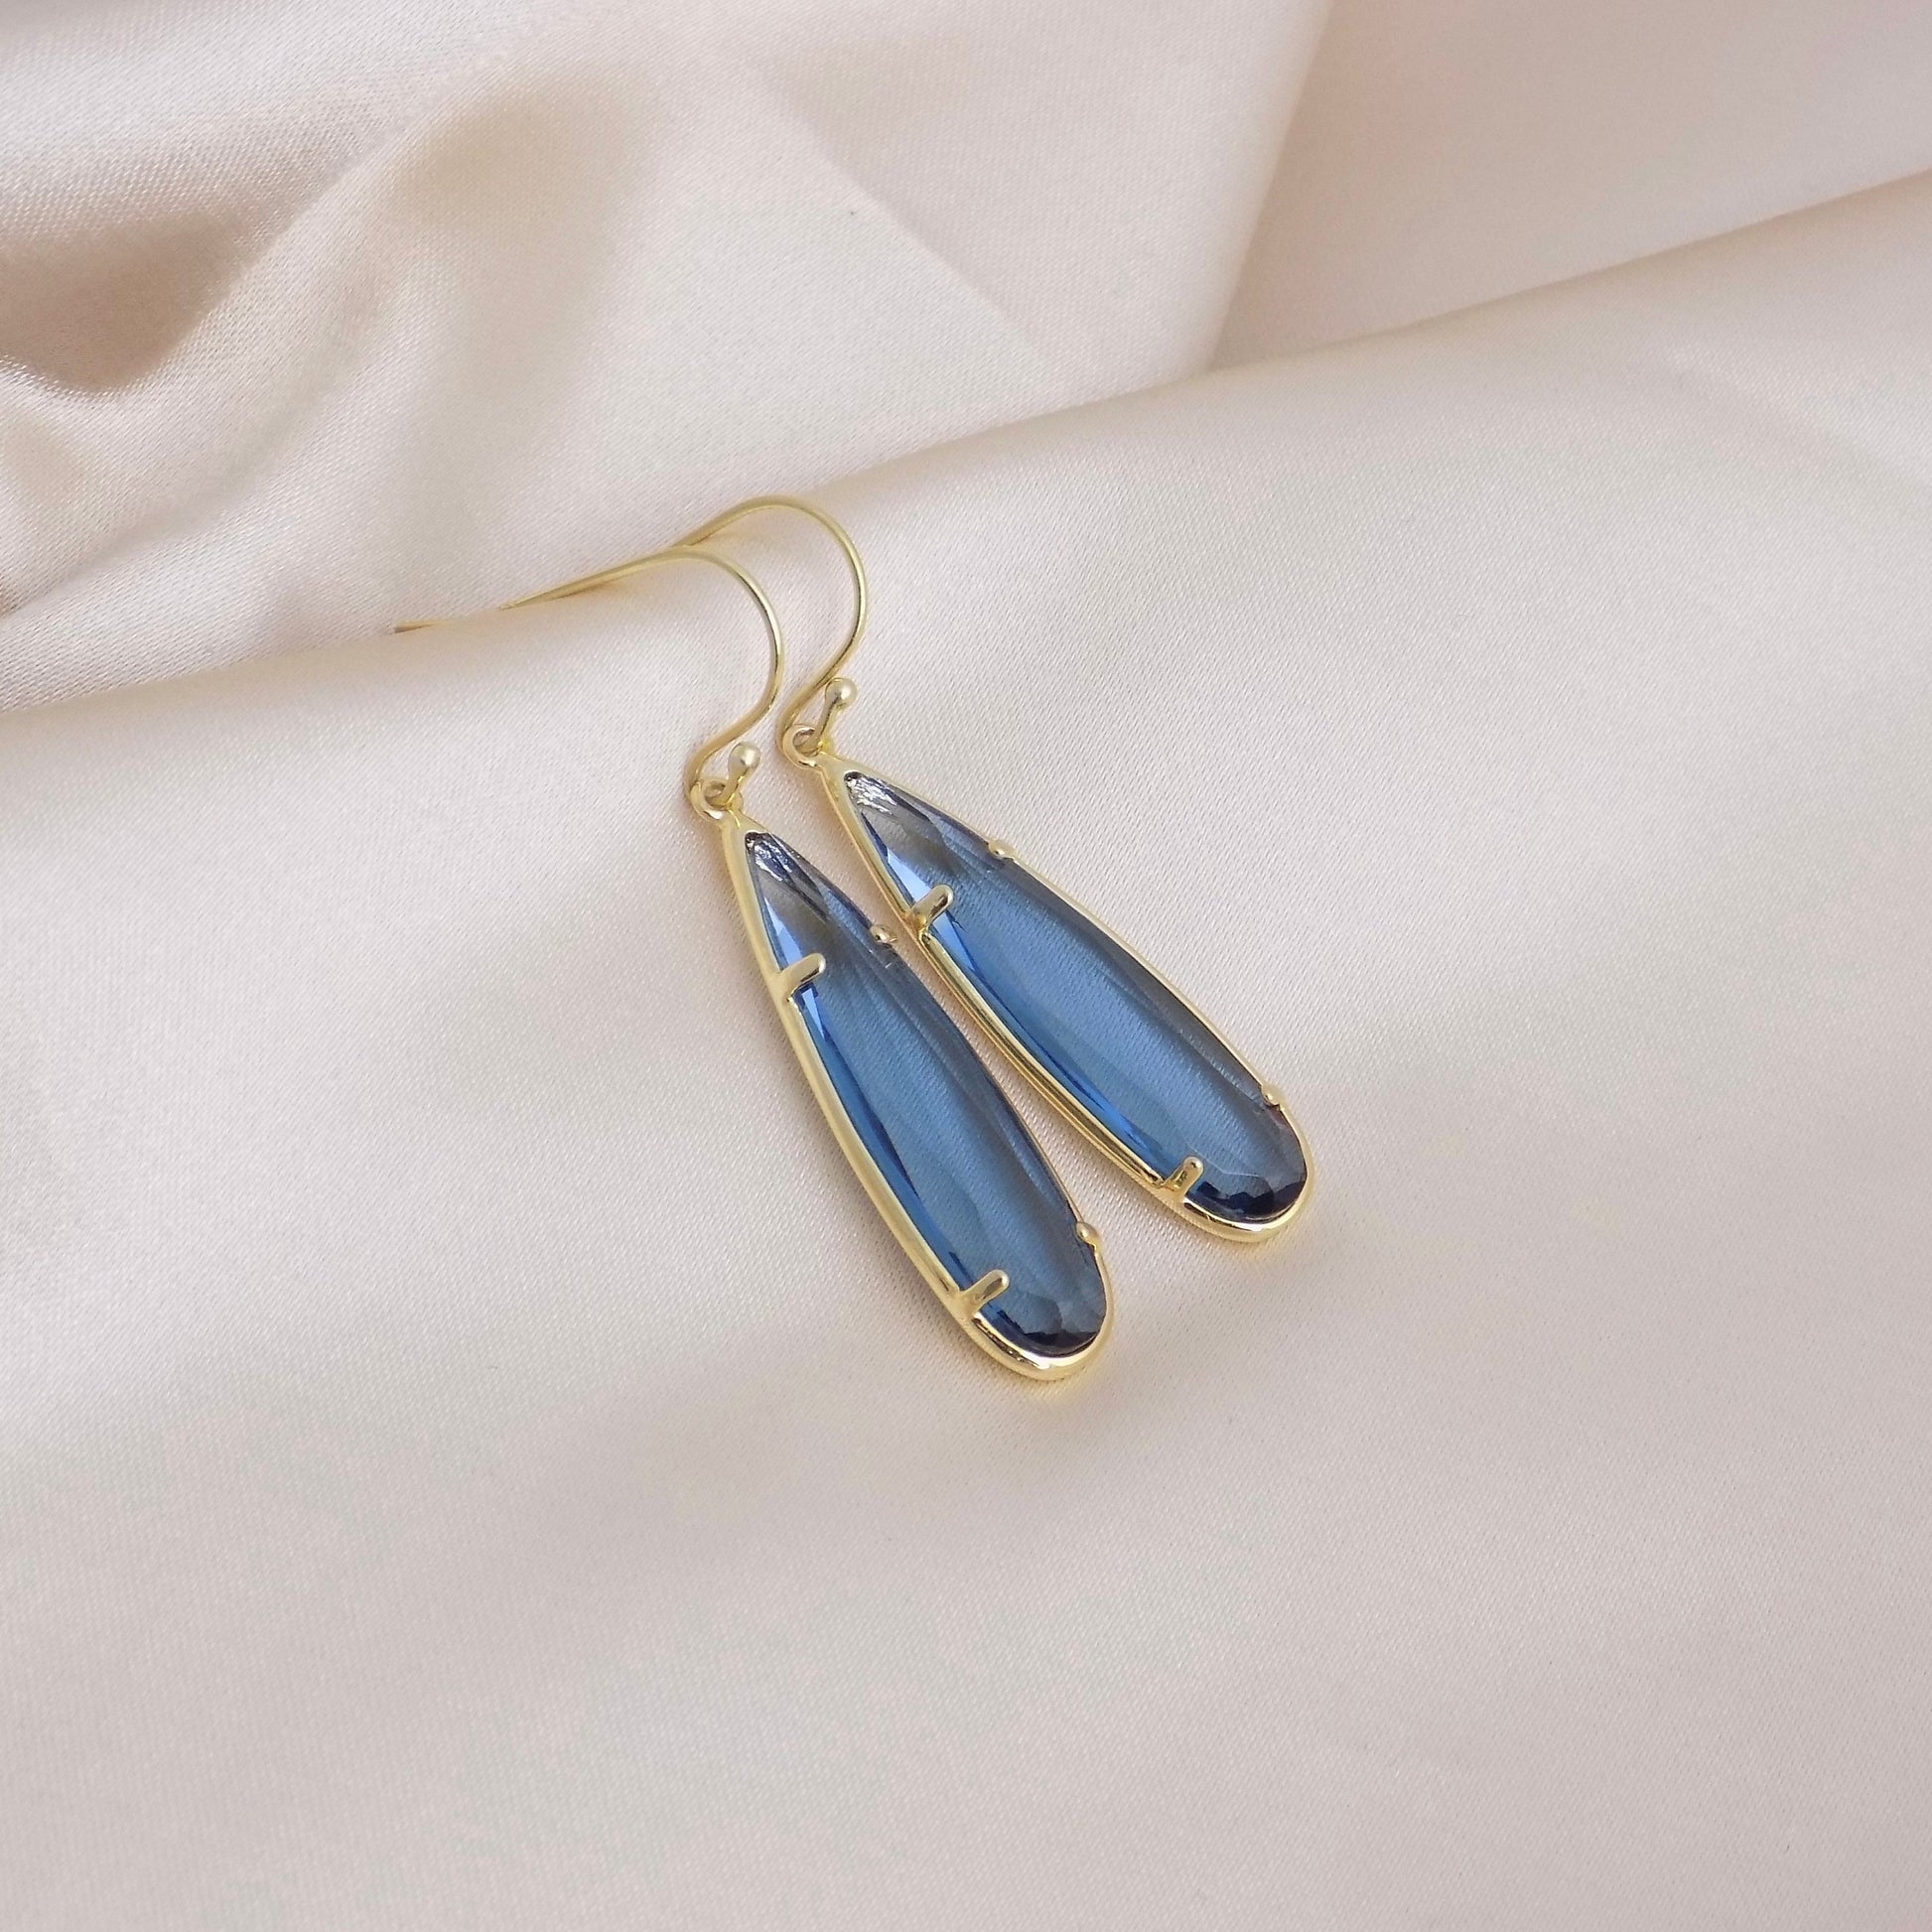 Valentines Day Gift, Large Blue Crystal Earrings Gold, Blue Stone Statement Earring, M6-139